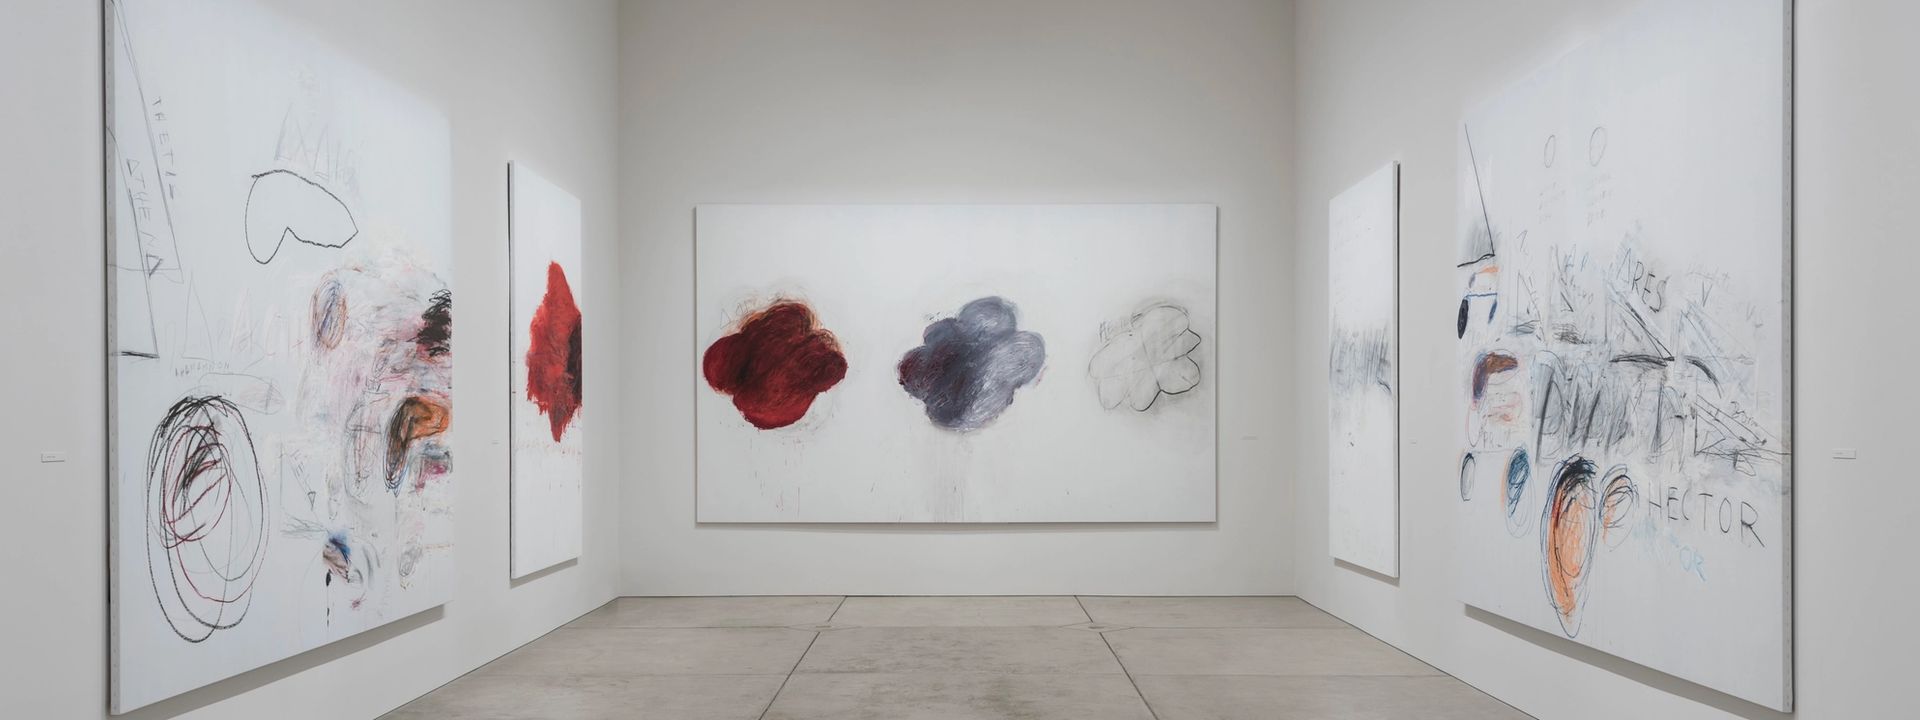 Fifty Days at Iliam, 1978, by Cy Twombly